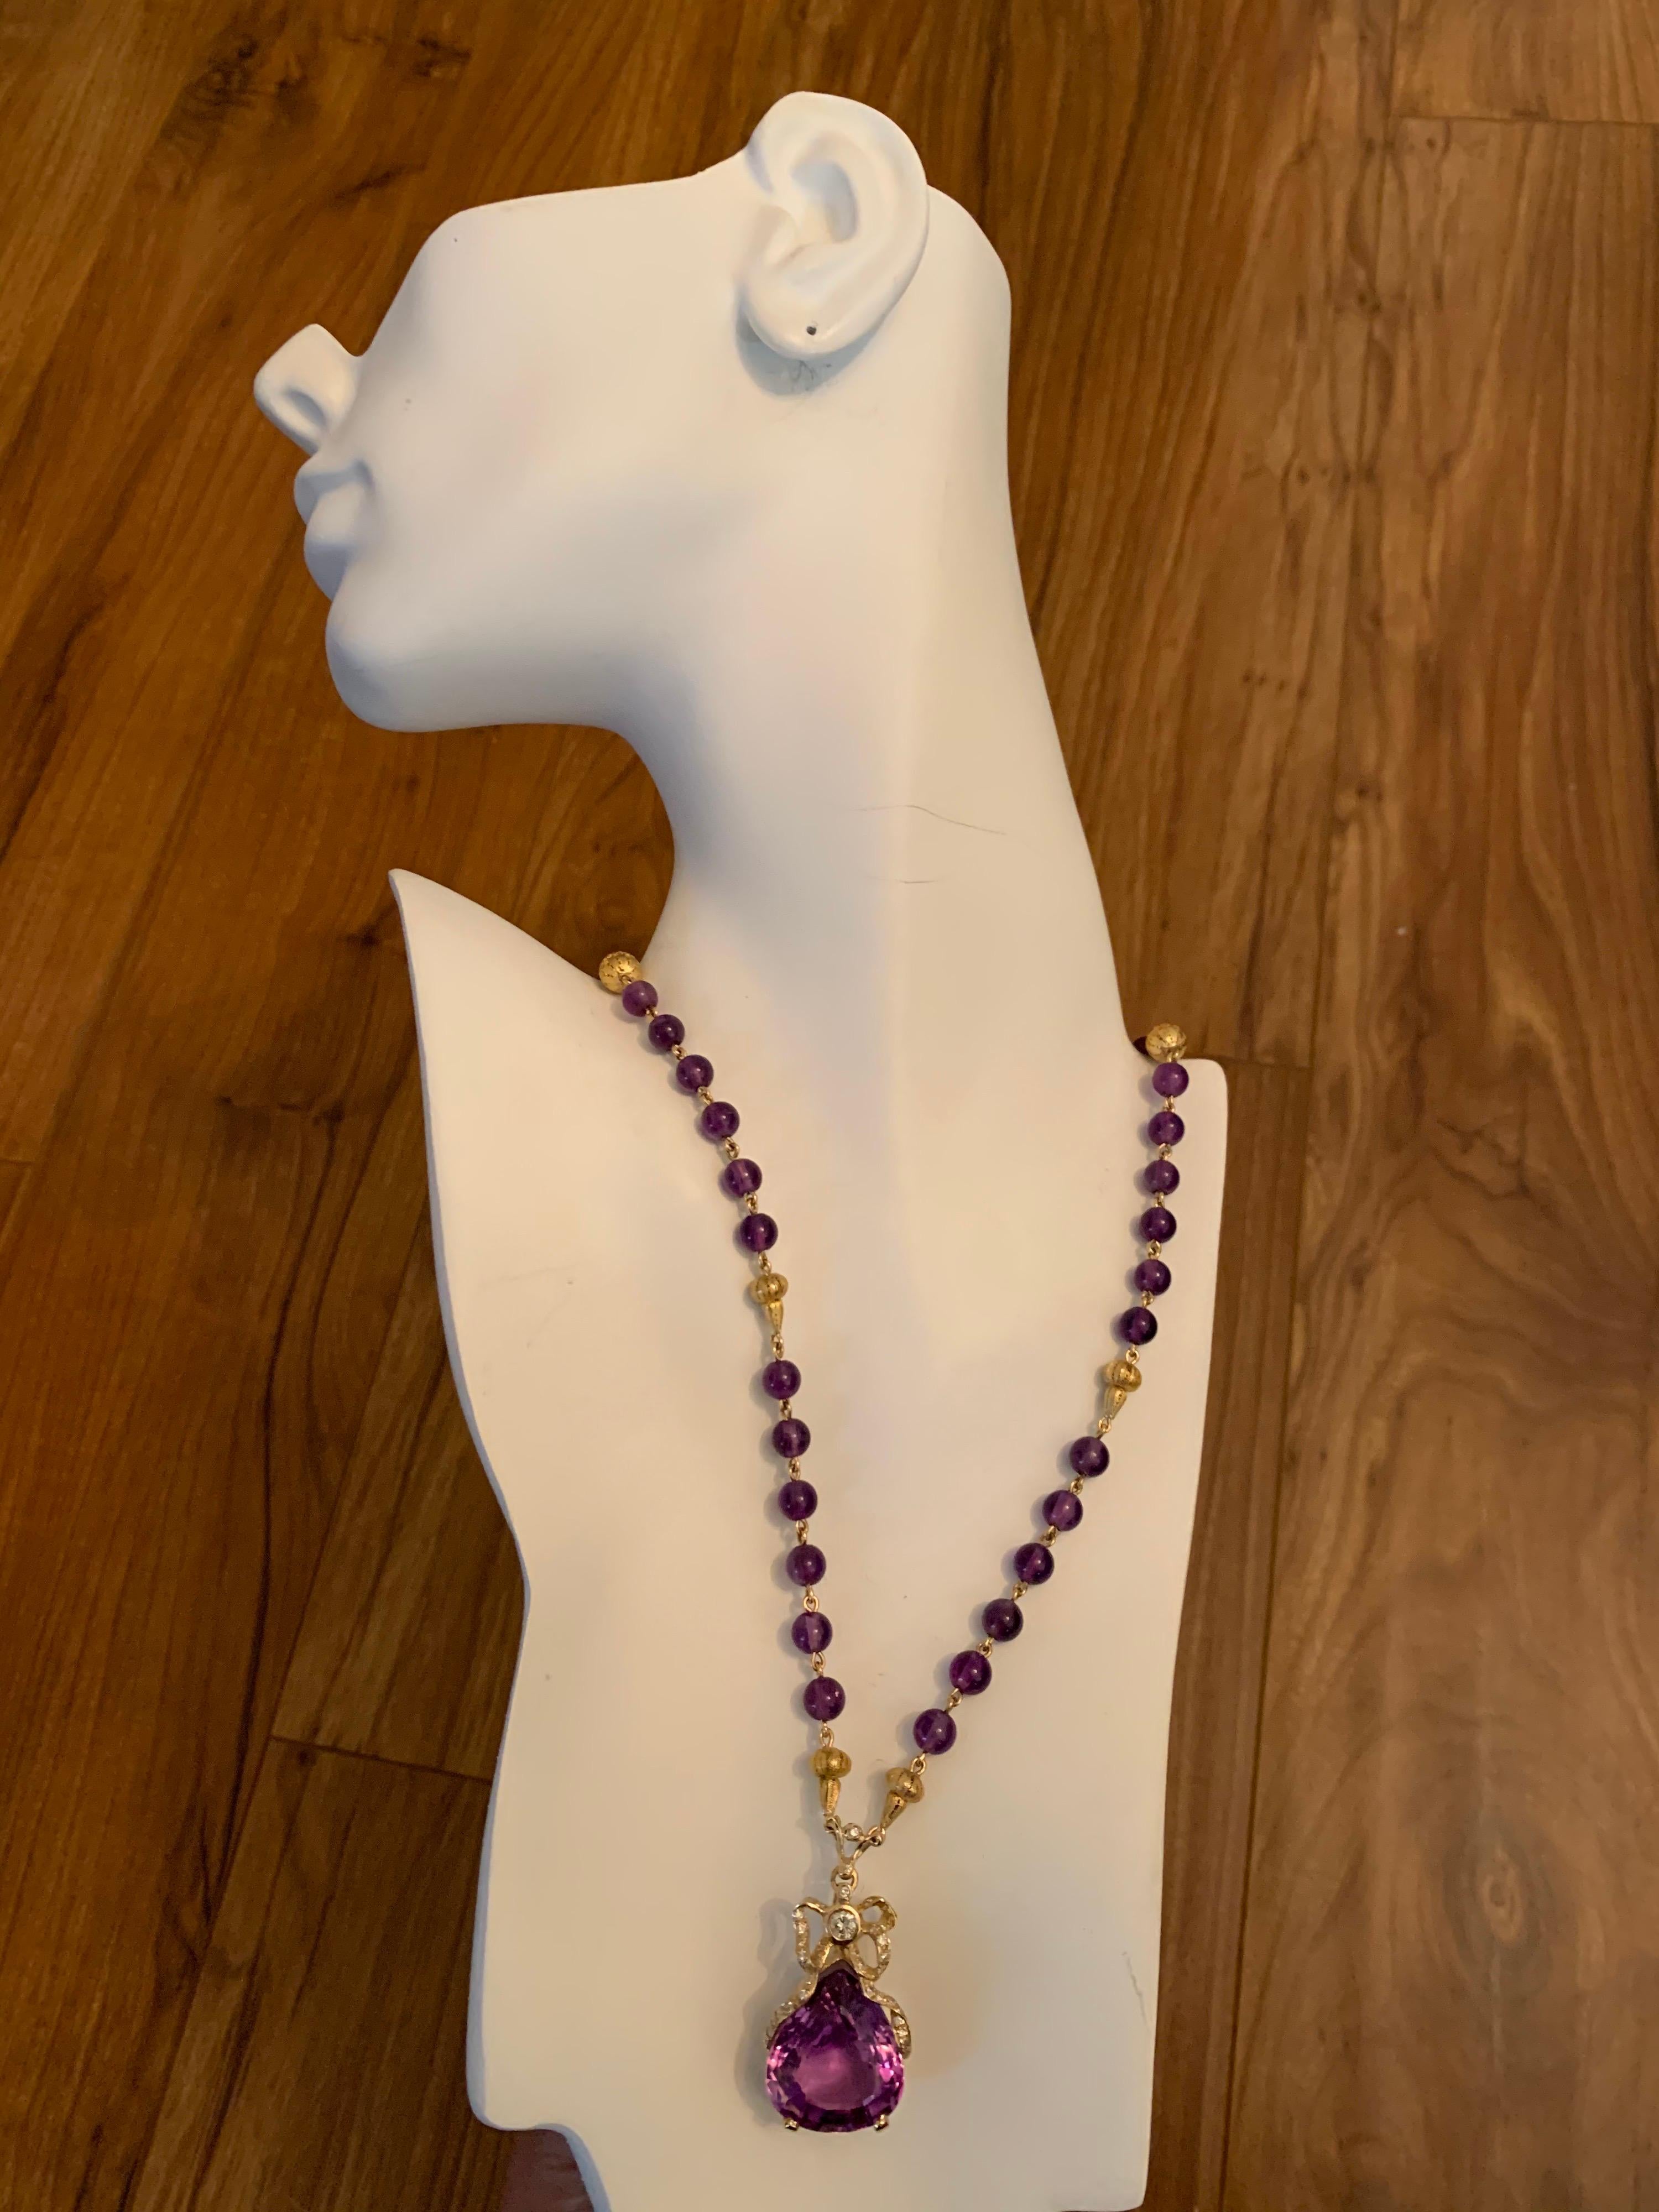 Retro 14k Yellow Gold 35 Carat Natural Amethyst & Diamond Pendant Necklace Circa 1960.

The piece is set with 36 Natural Round Brilliant Diamonds (G-I, VS-I) approximately 1 carat weight total. The center stone Purple Amethyst measures approximately